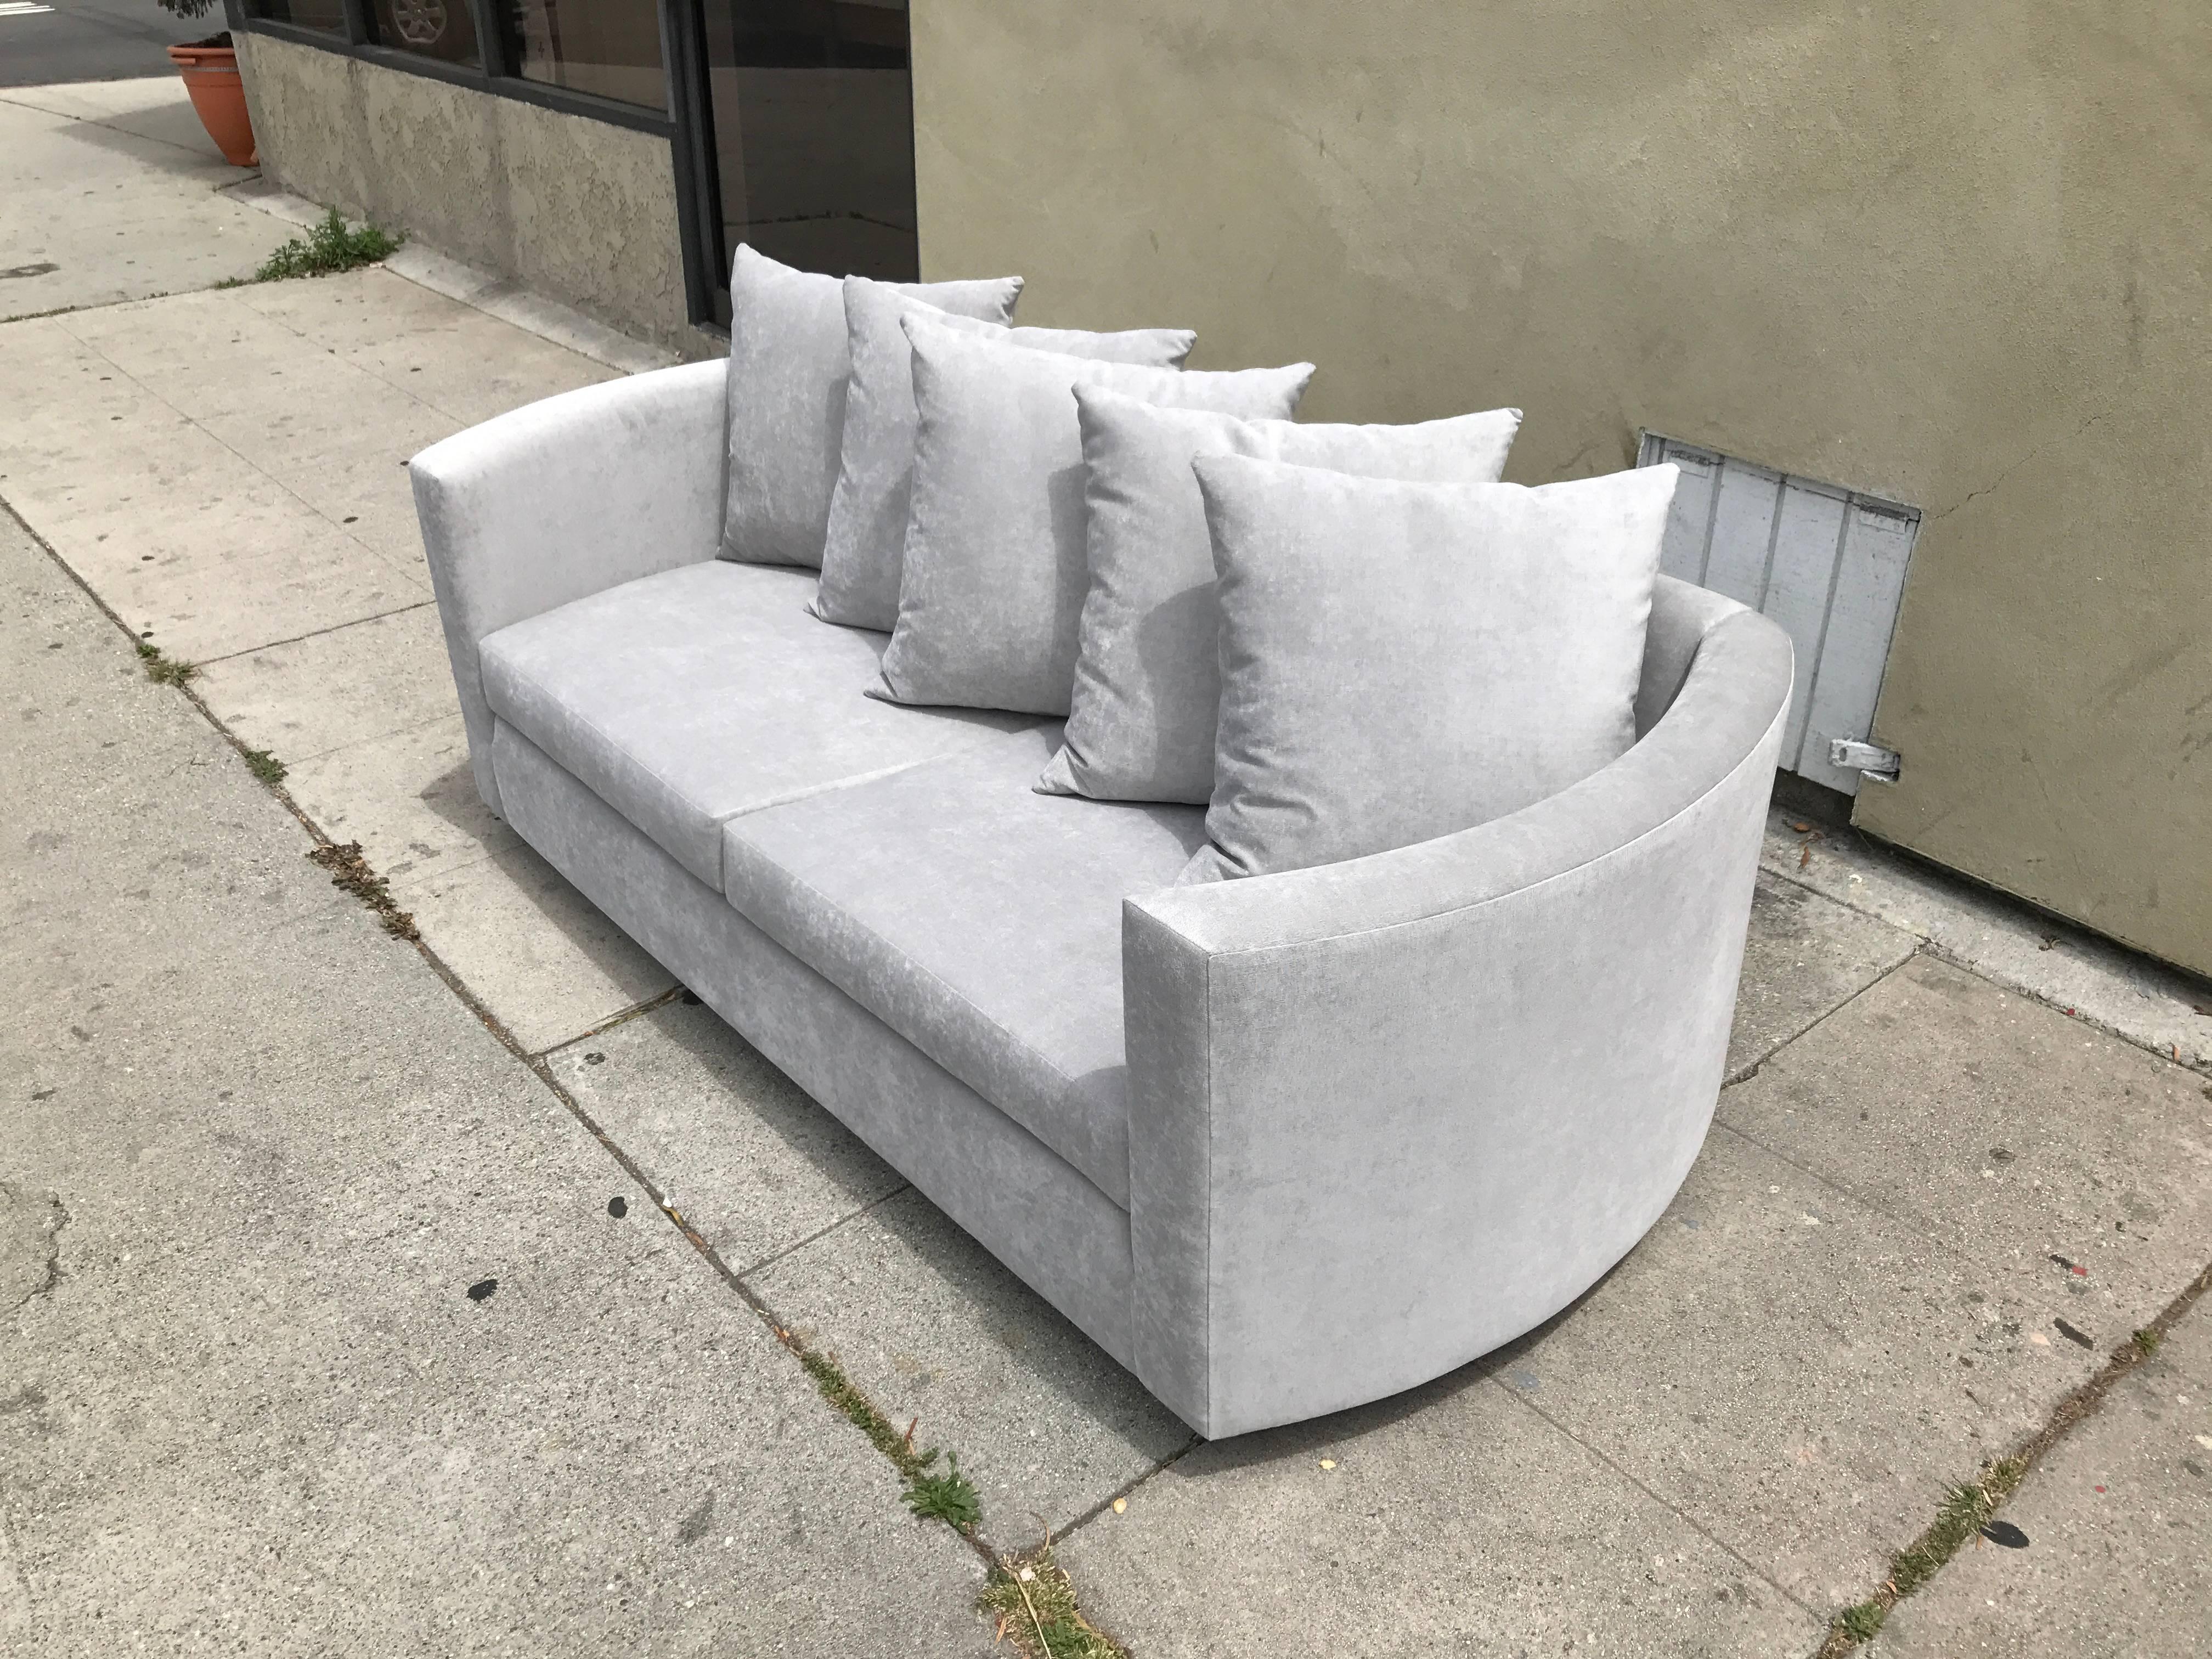 Newly reupholstered in dove gray fabric. Loveseat comes with five matching pillows.
It is curved on the arms and flat on the back which allows to set it against the wall.